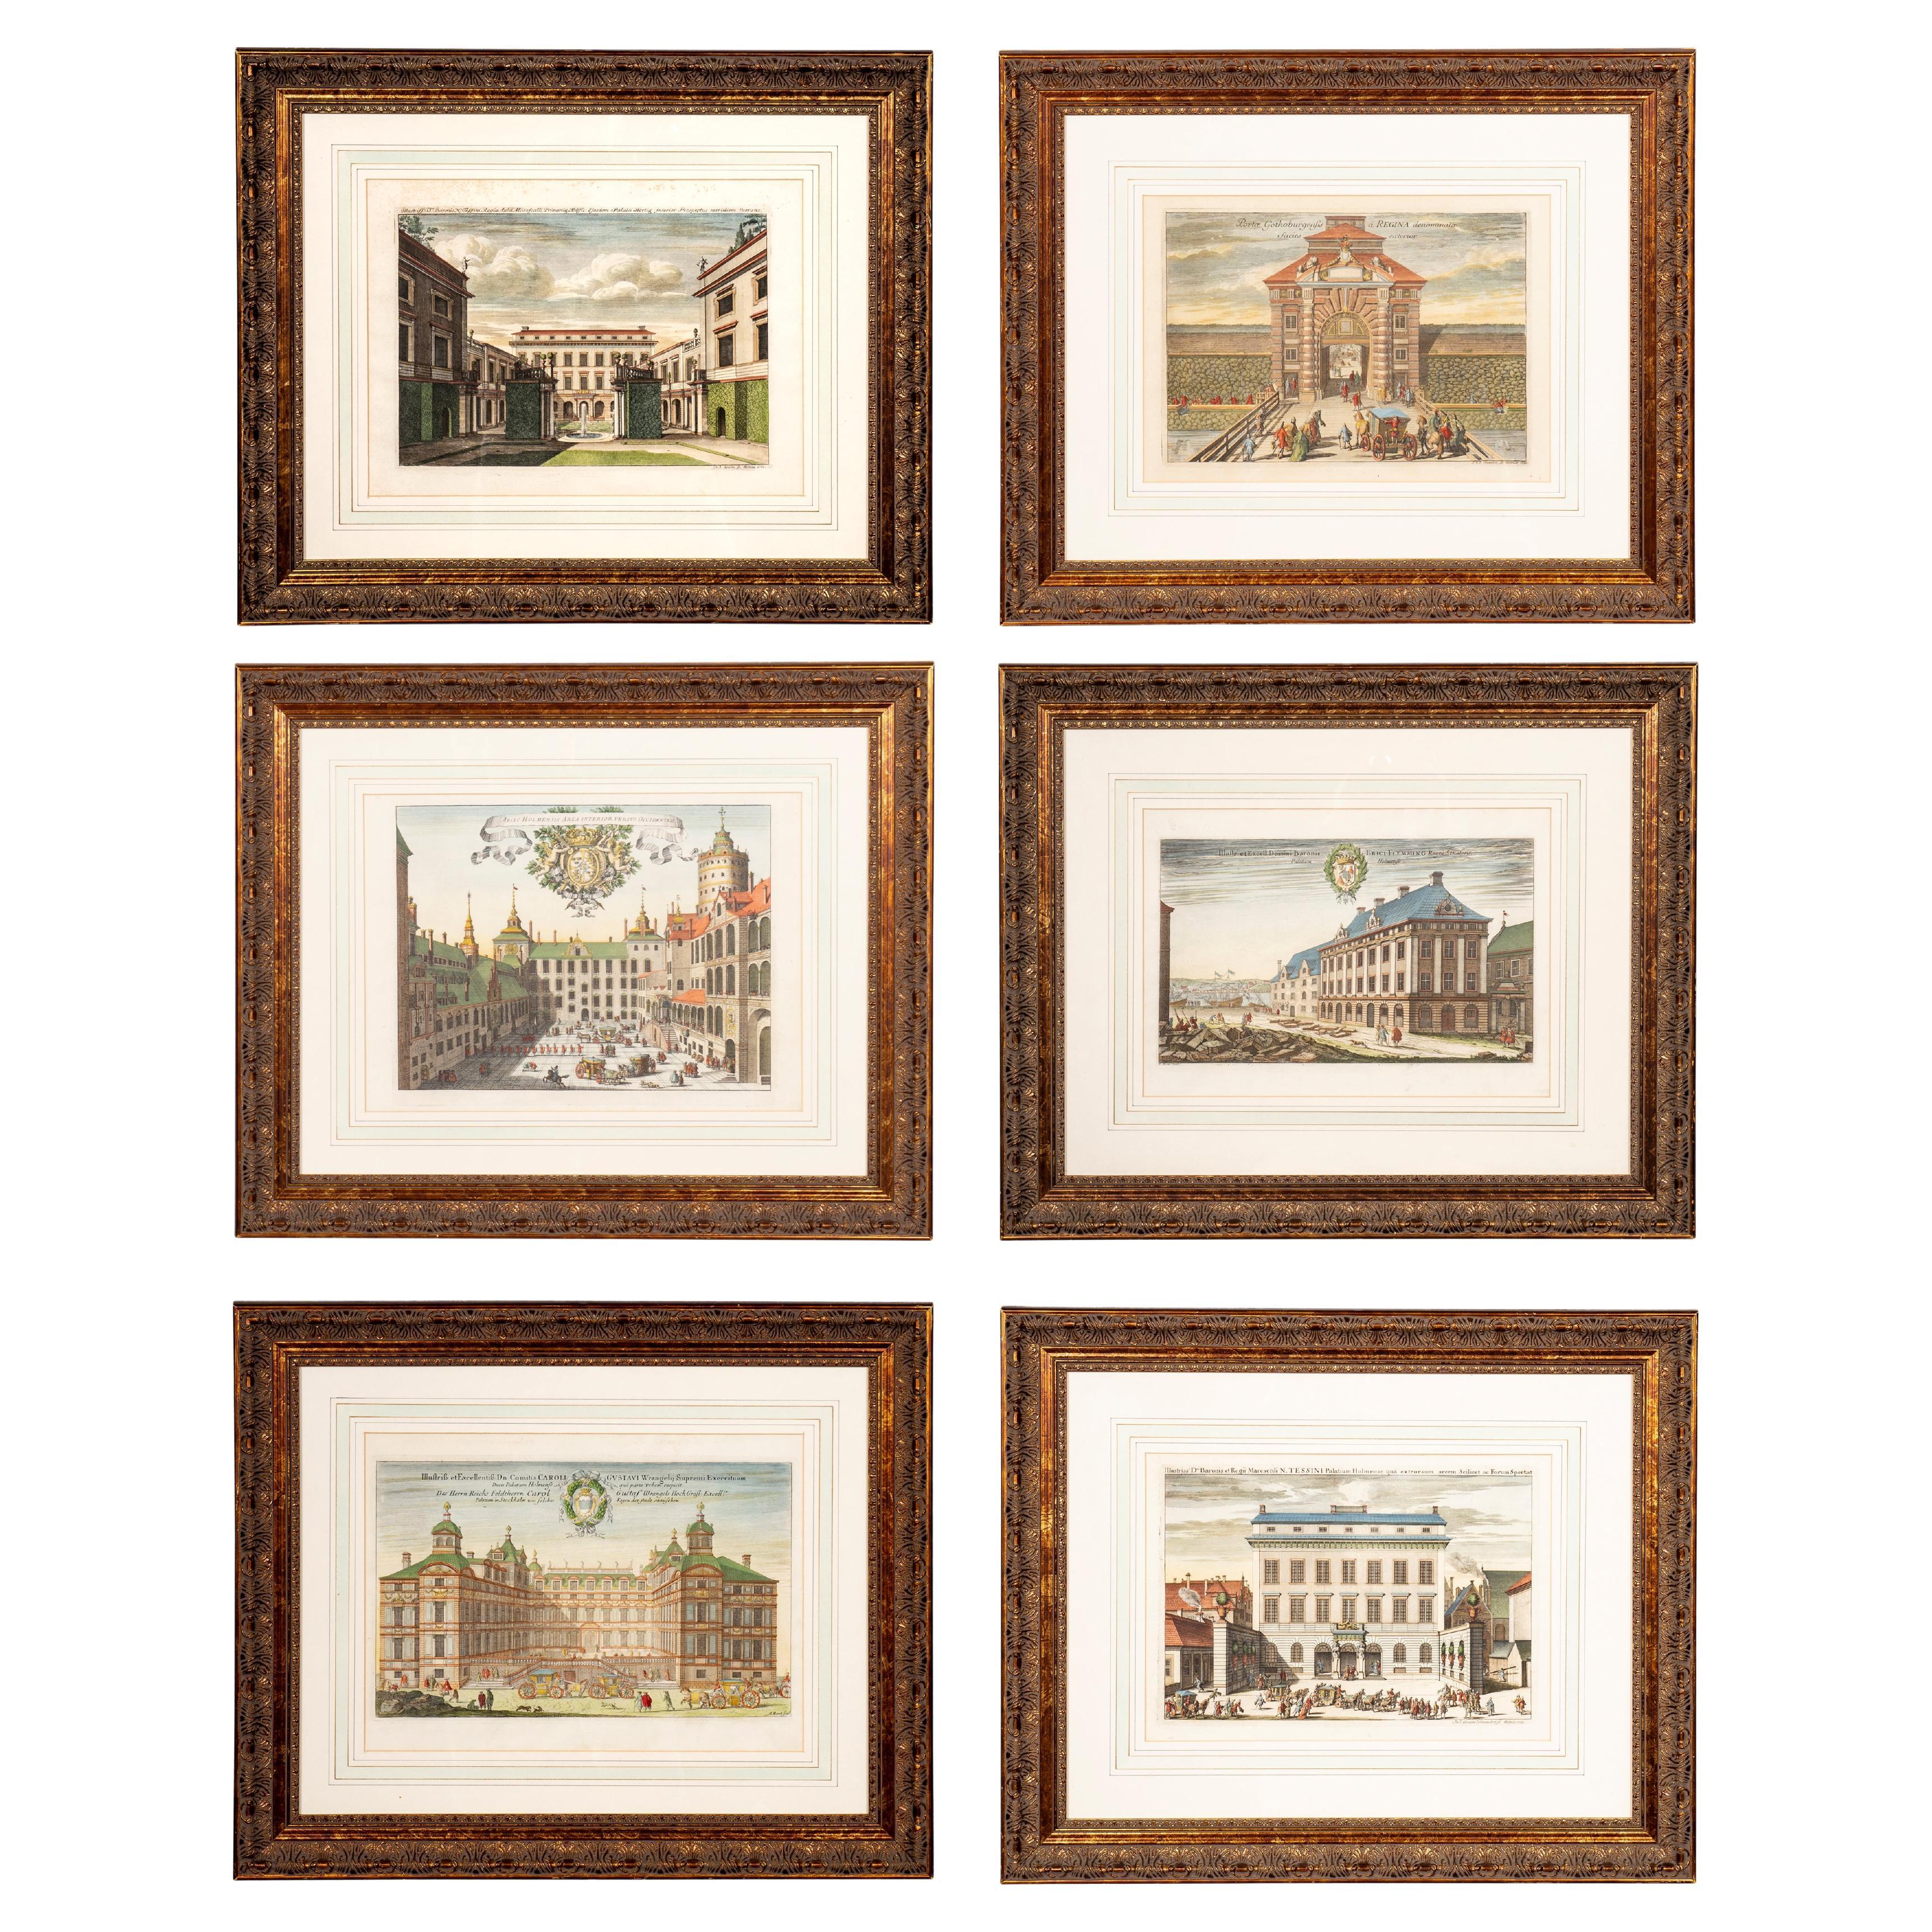 Set of Six Framed Hand Colored Engravings of Swedish Royal Residences